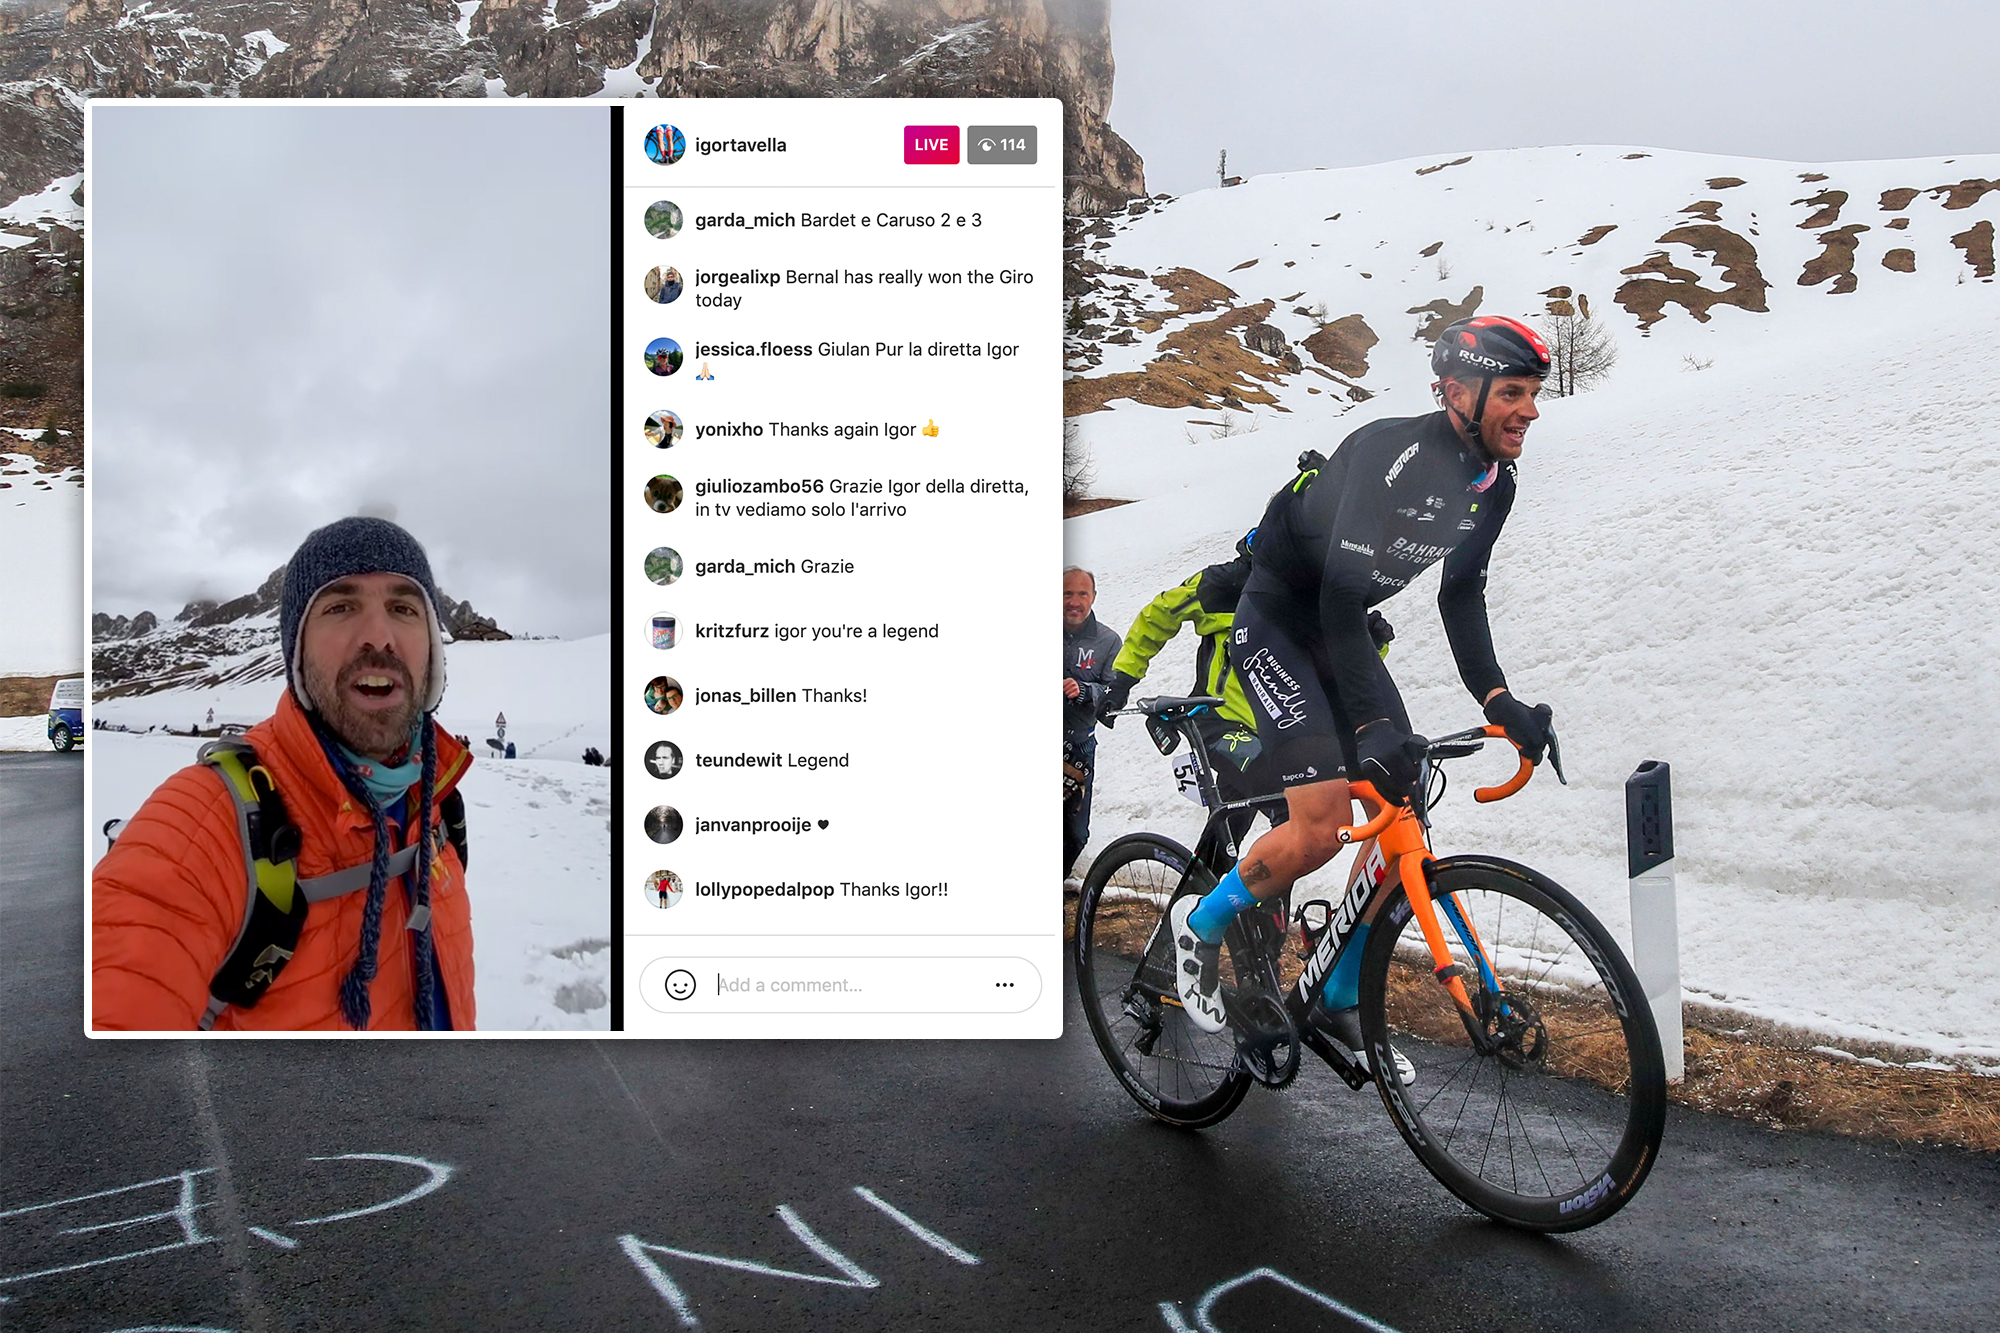 As TV coverage ground to a halt, this fan live-streamed stage 16 of the Giro dItalia on Instagram atop the Passo Giau Cycling Weekly